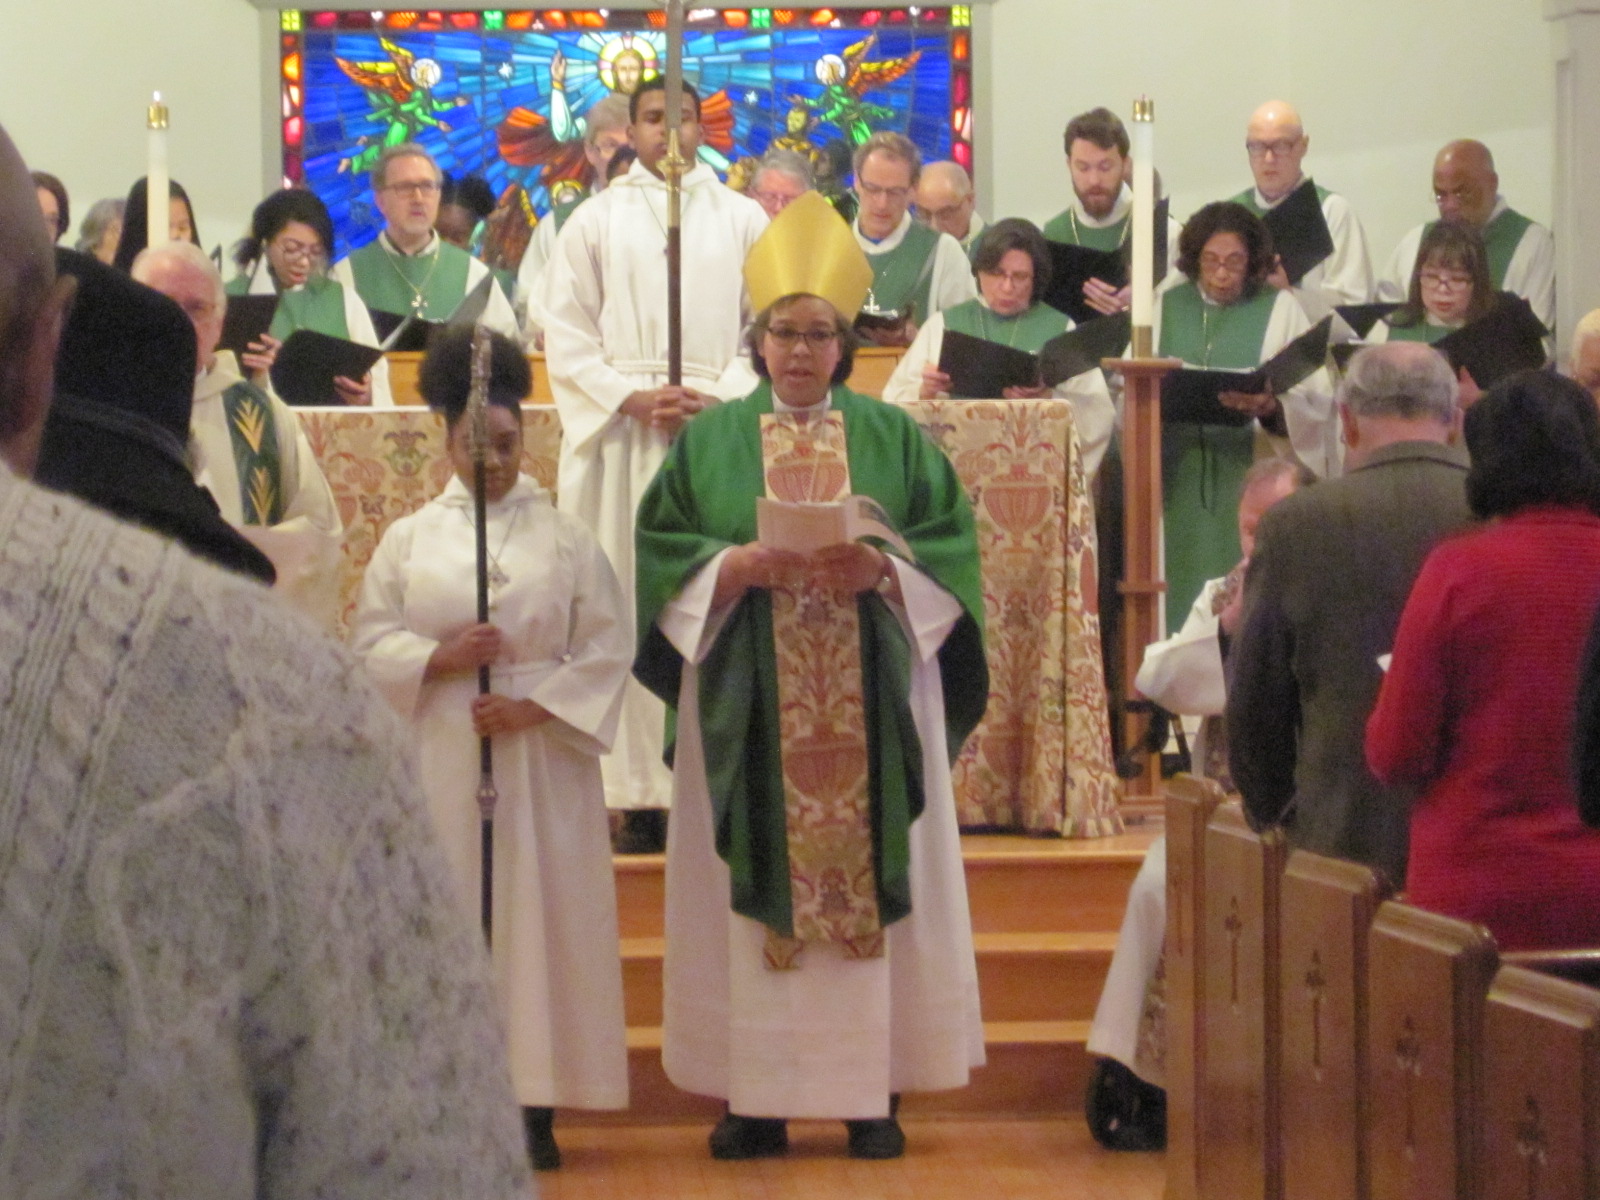 A Pastoral Letter from Our Bishop